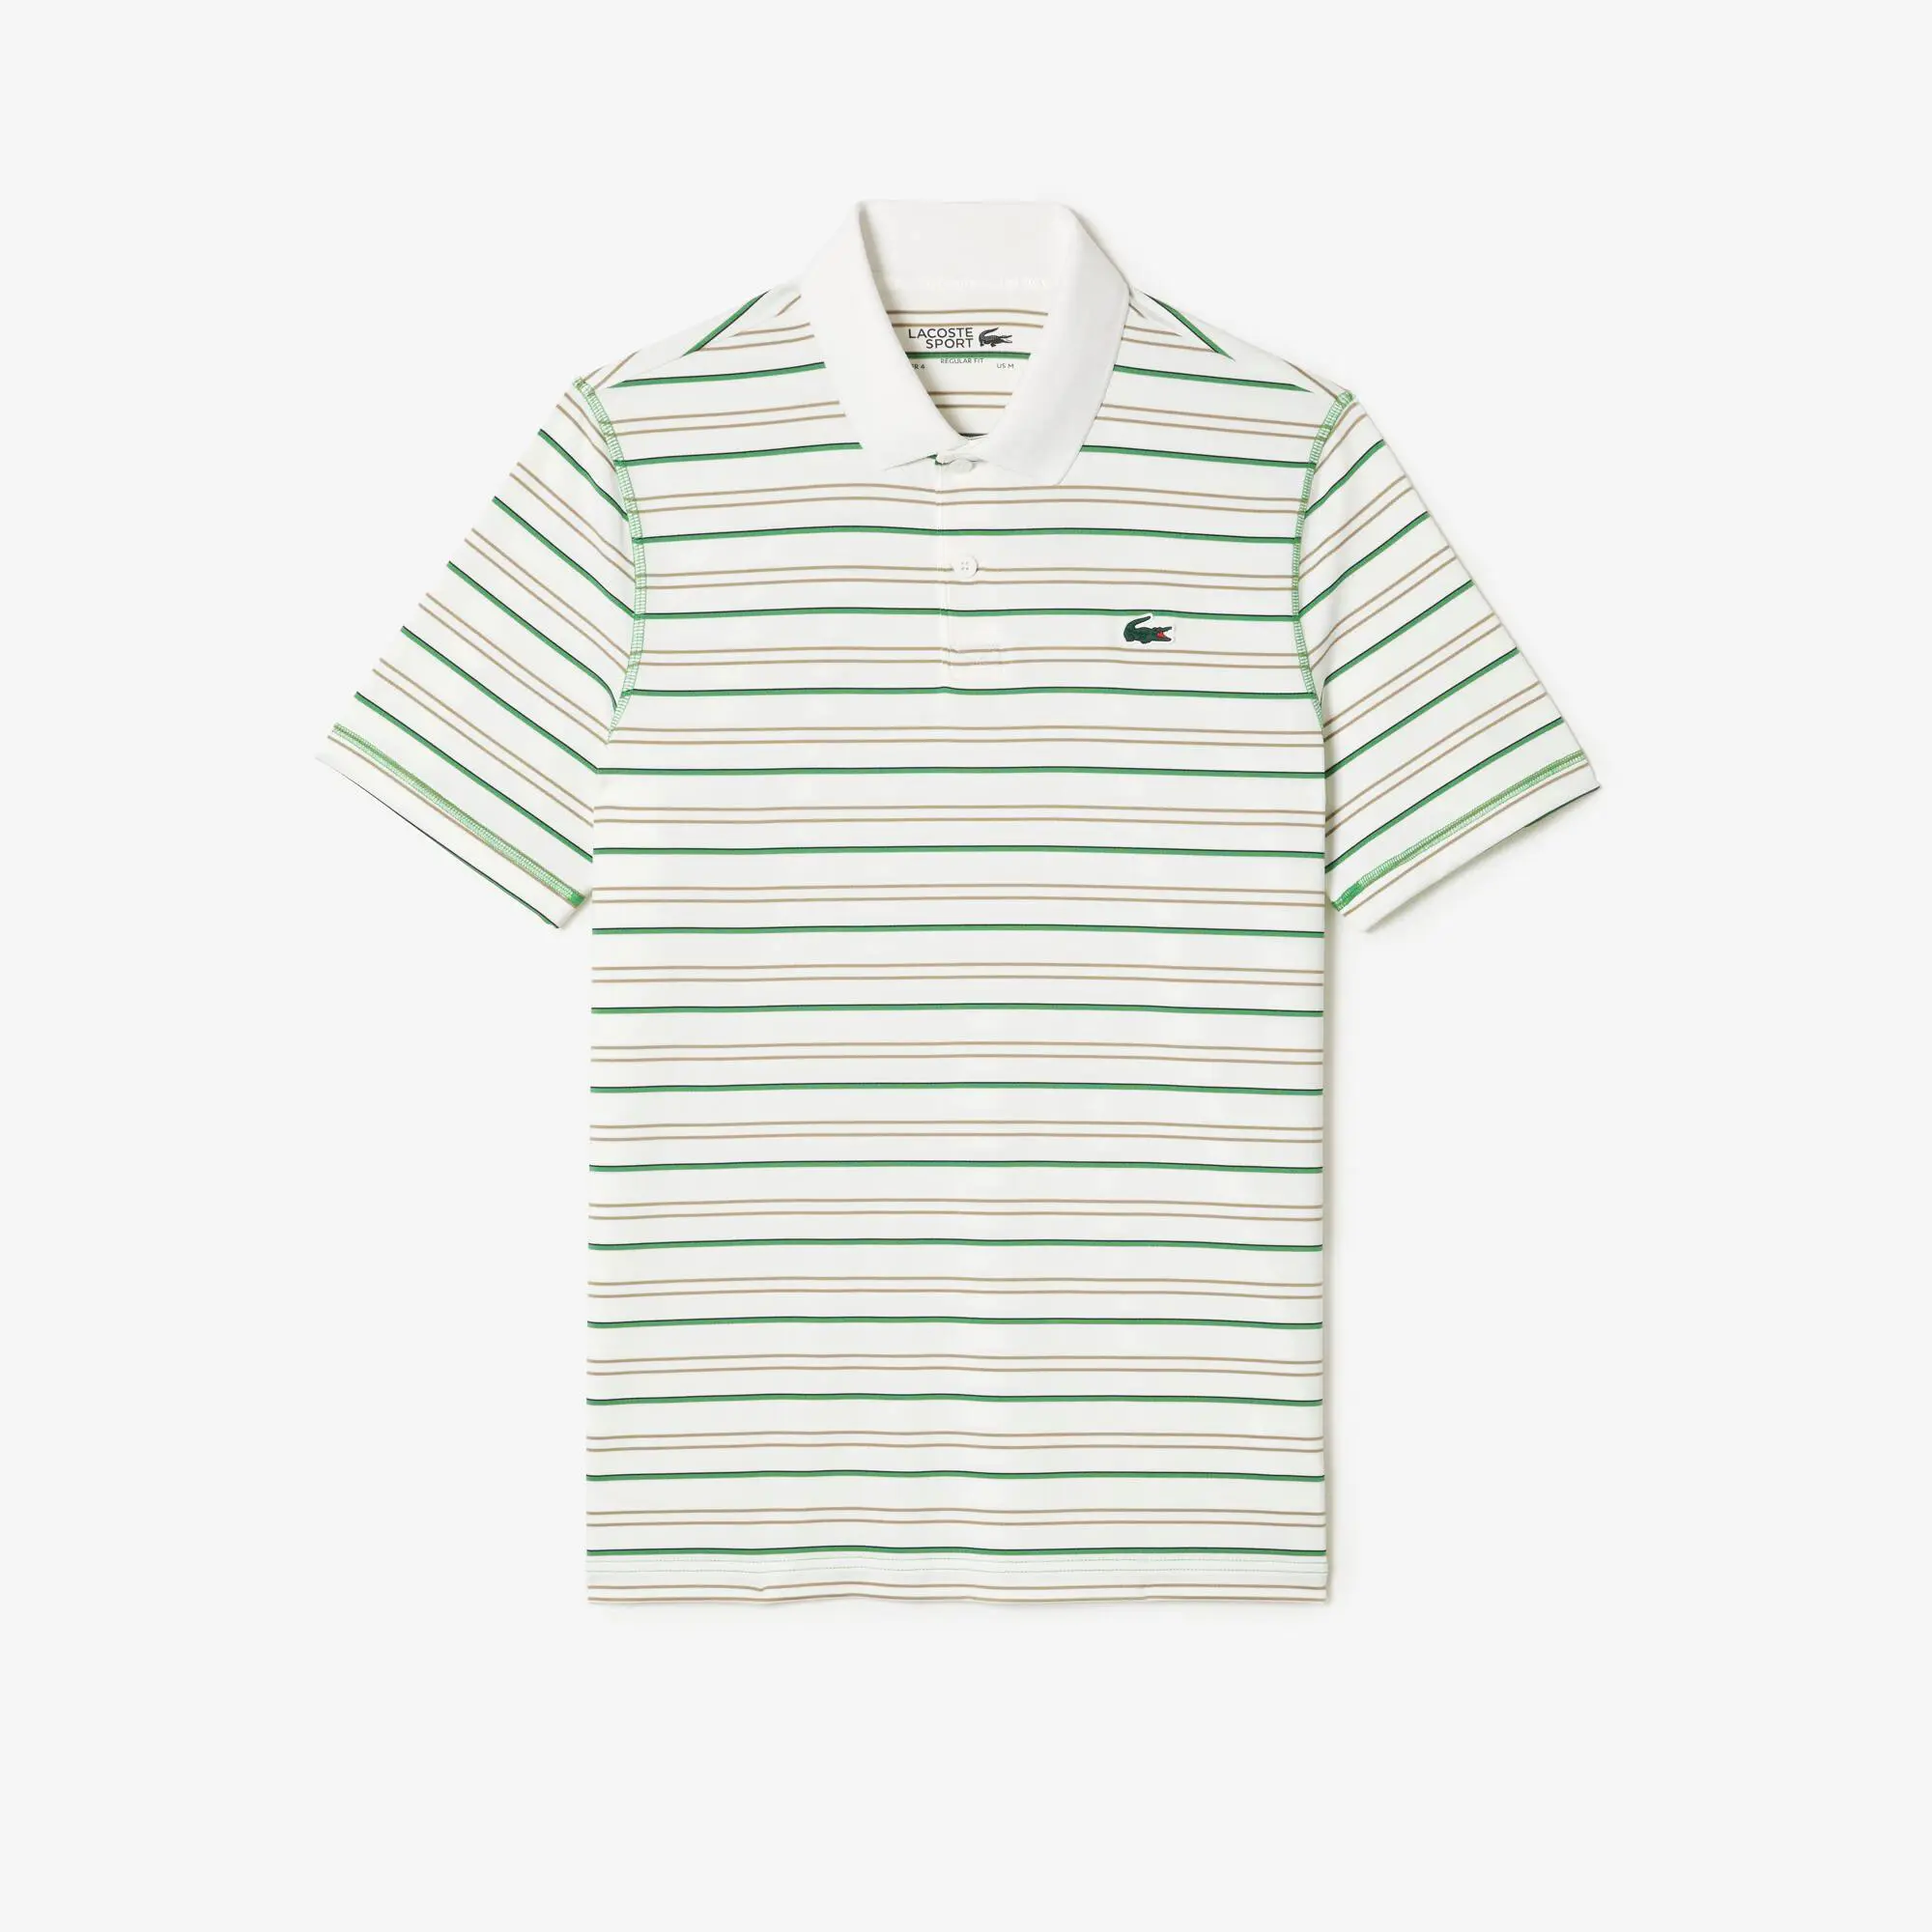 Lacoste Men’s Lacoste Golf Recycled Polyester Stripe Polo Shirt. 2